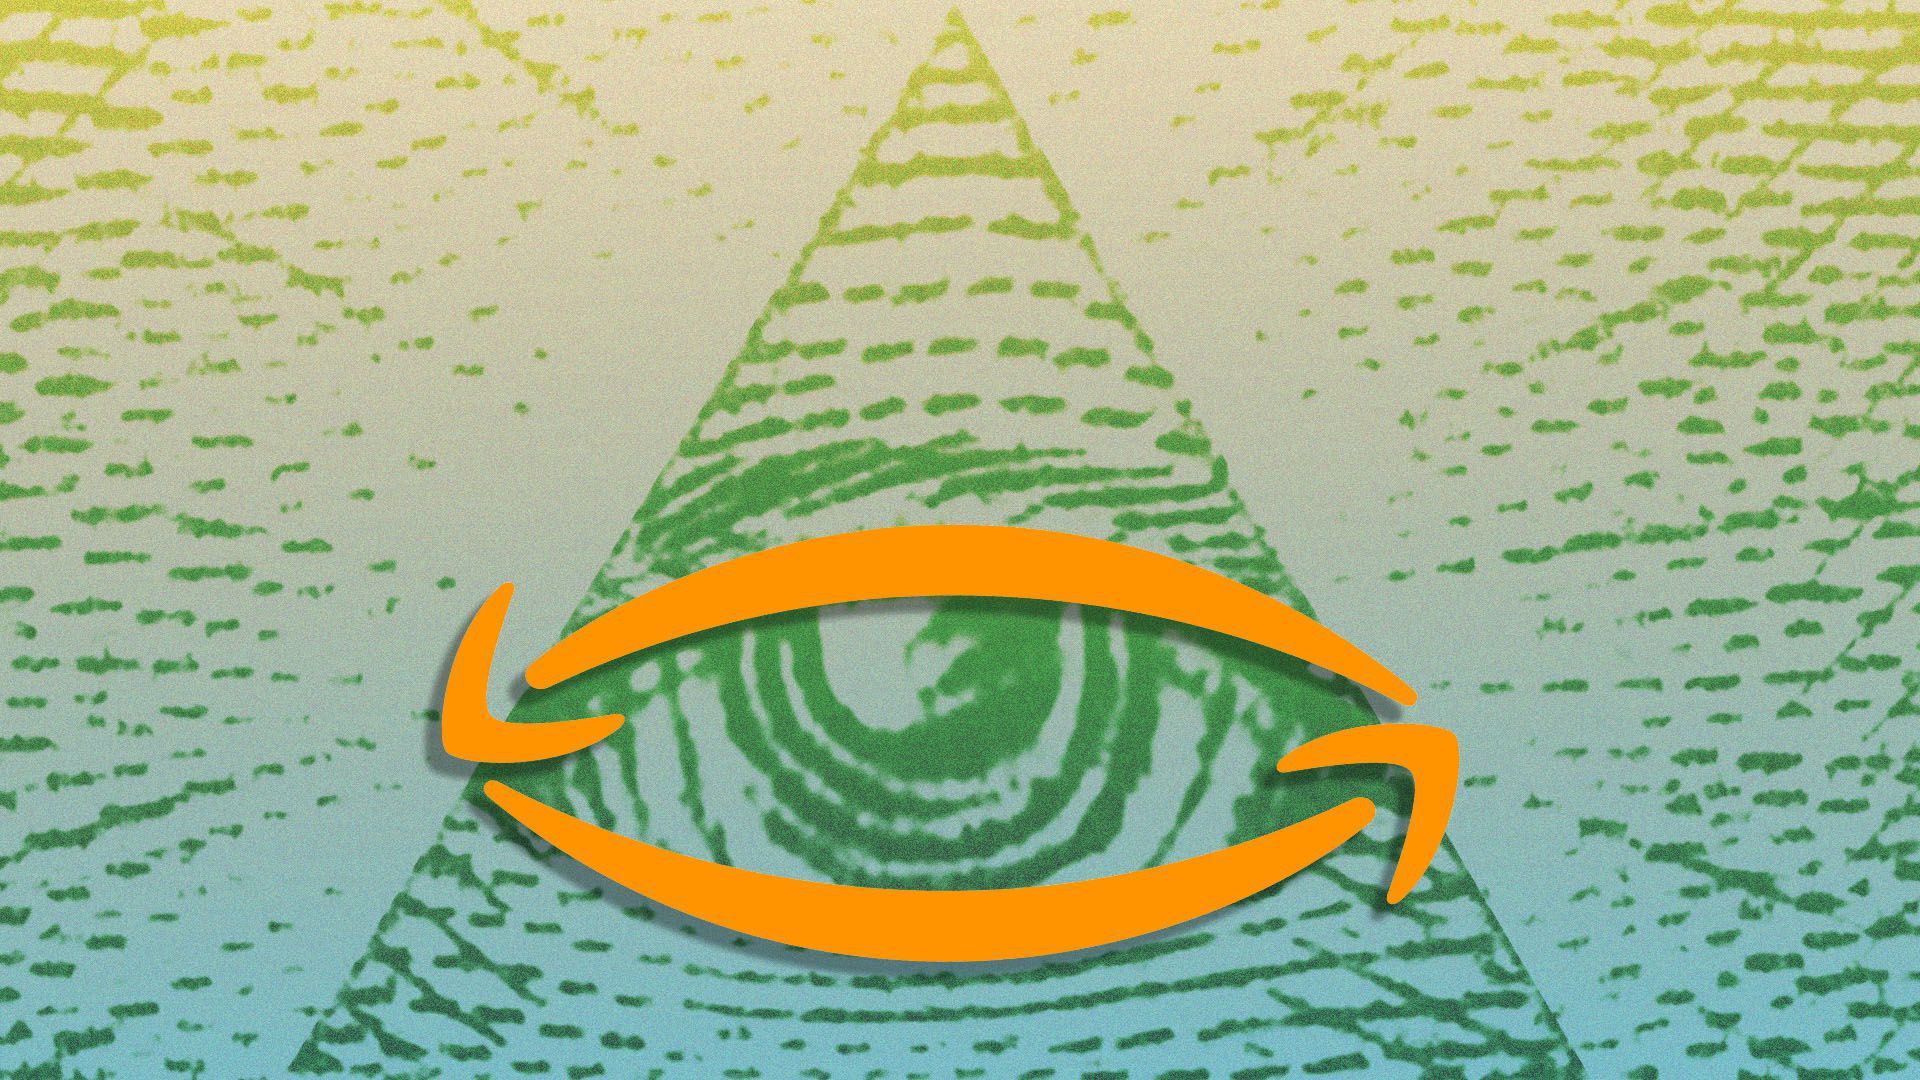 An Illustration of the Amazon logo over the Eye of Providence